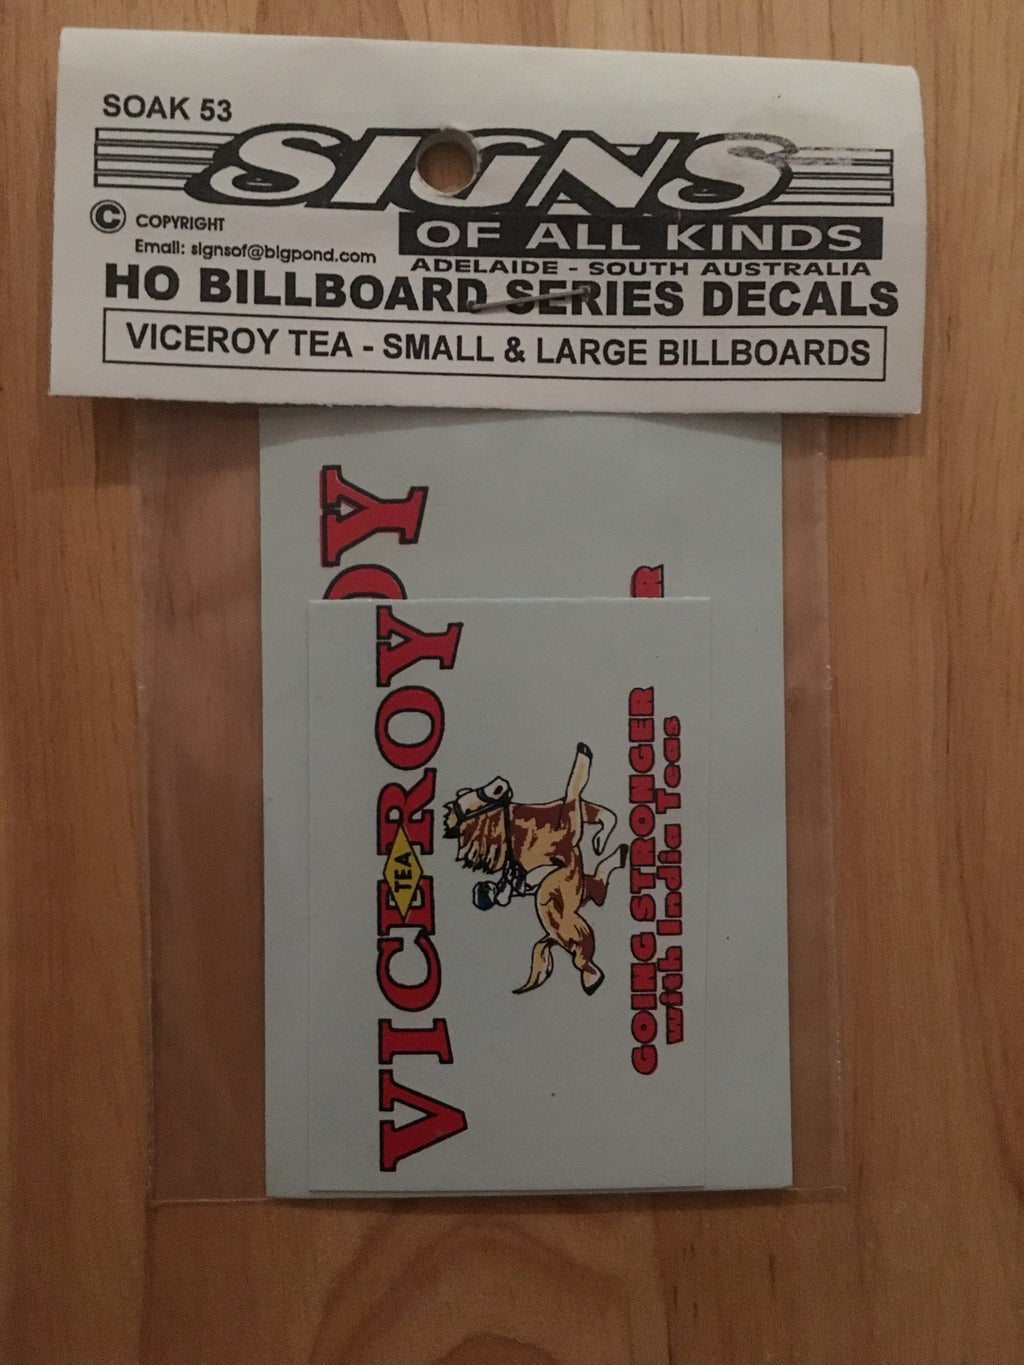 SOAK 53 BILLBOARD SIGNS SK 53 "VICEROY TEA" two sizes, small & large DECAL HO